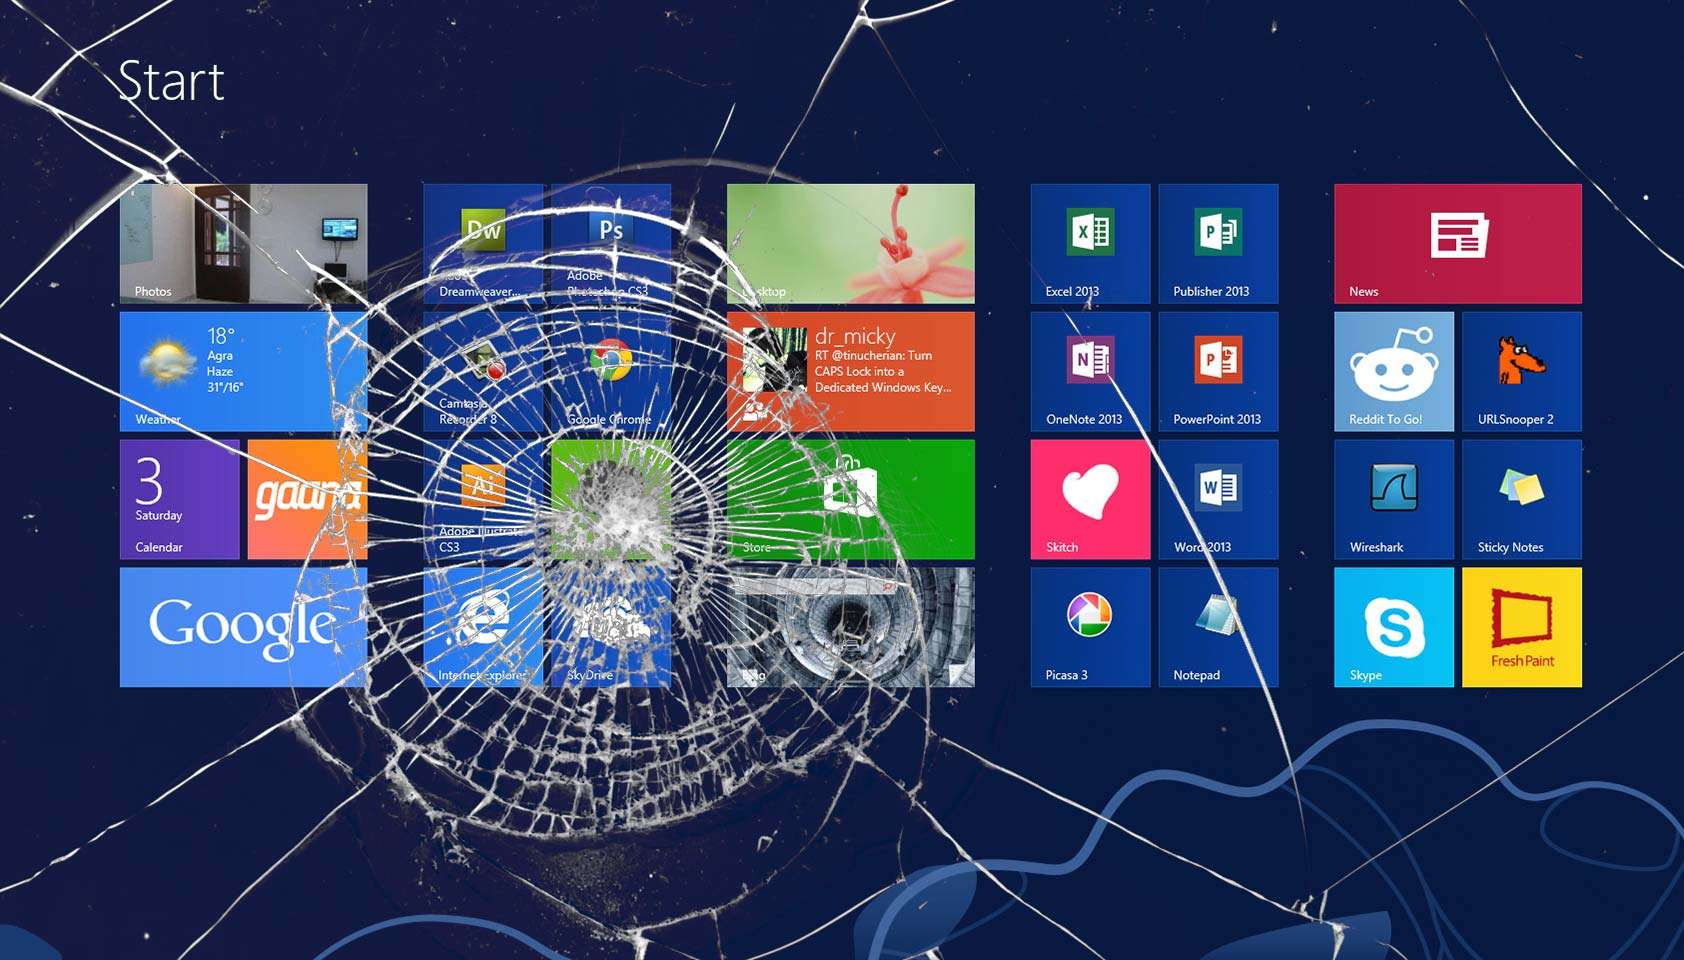 Show Your Support of Windows 8 With This Cracked Screen Wallpaper